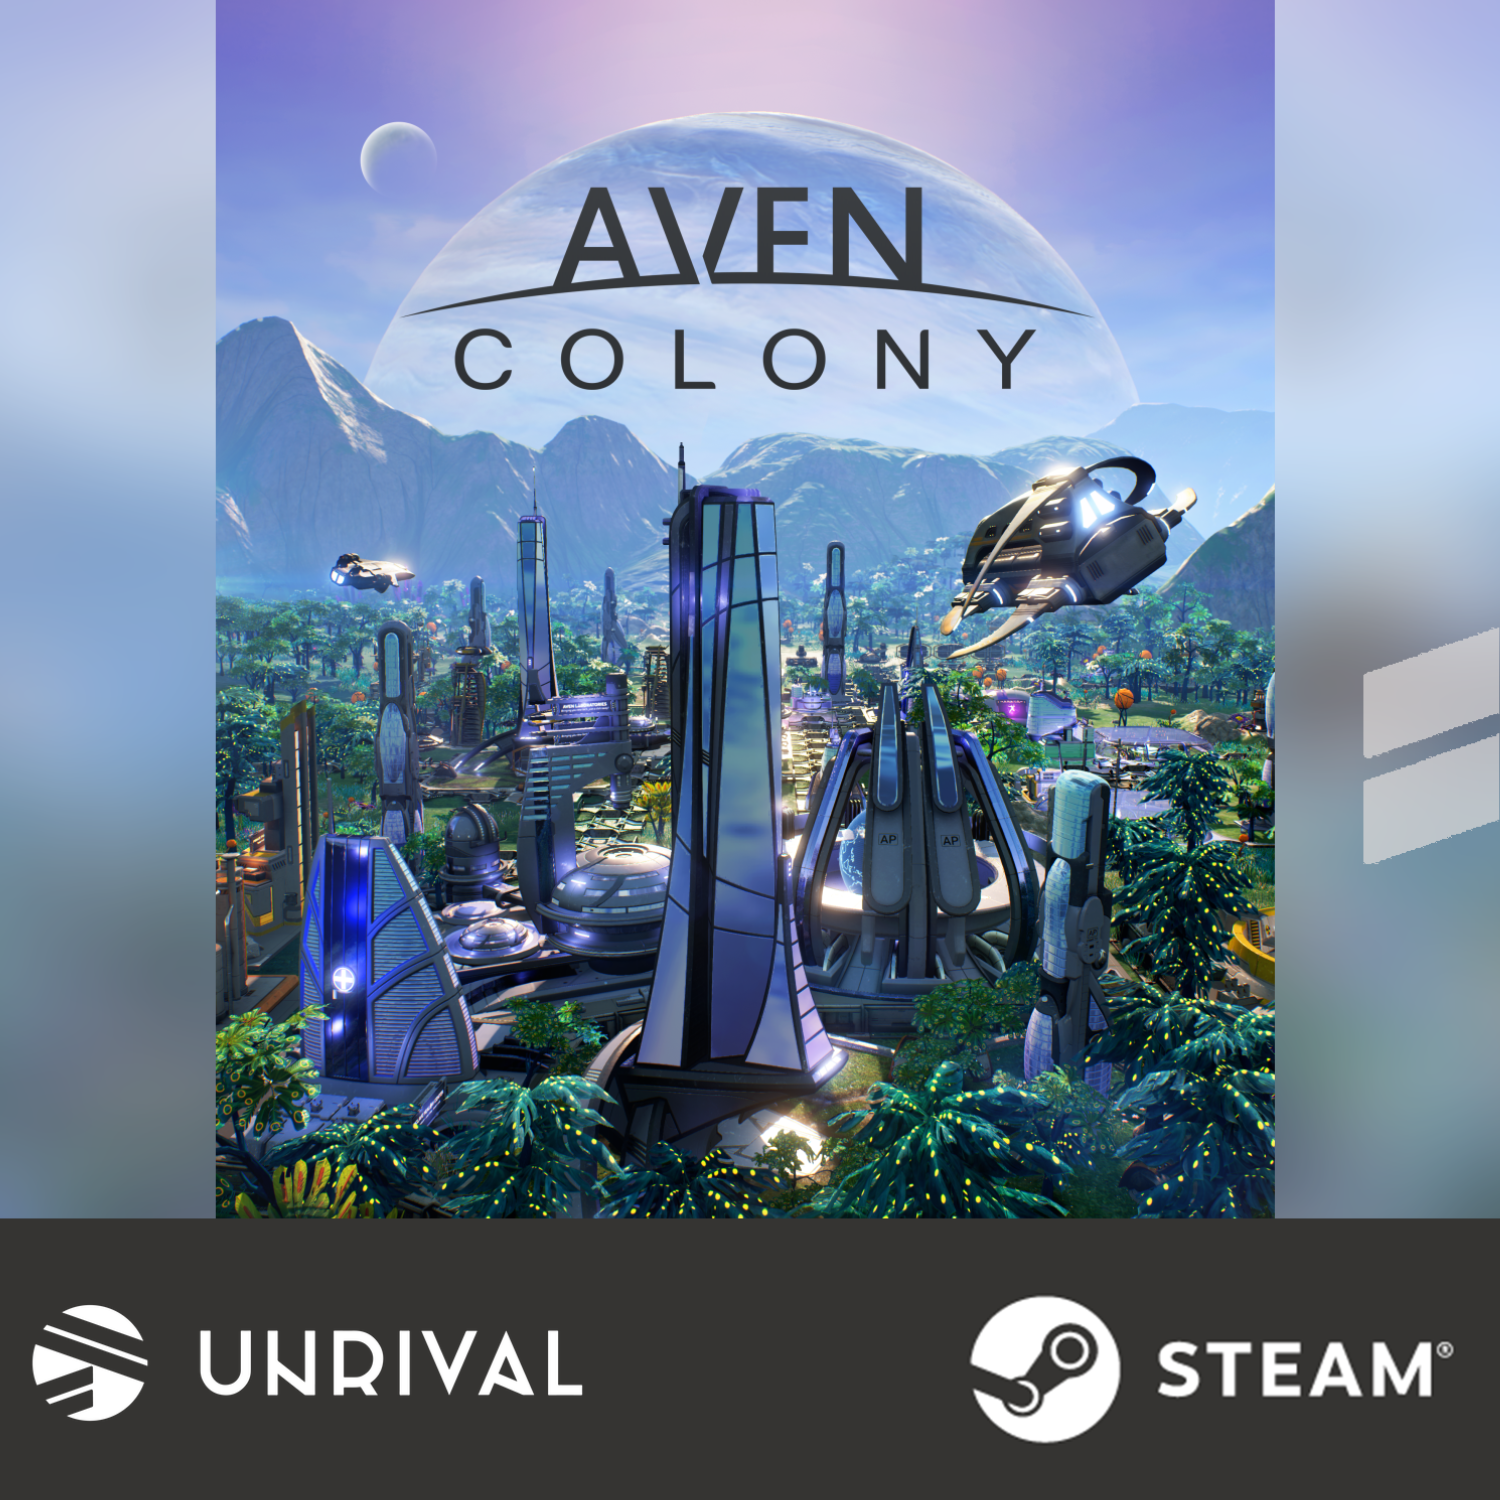 [Hot Sale] Aven Colony PC Digital Download Game (Single Player) - Unrival